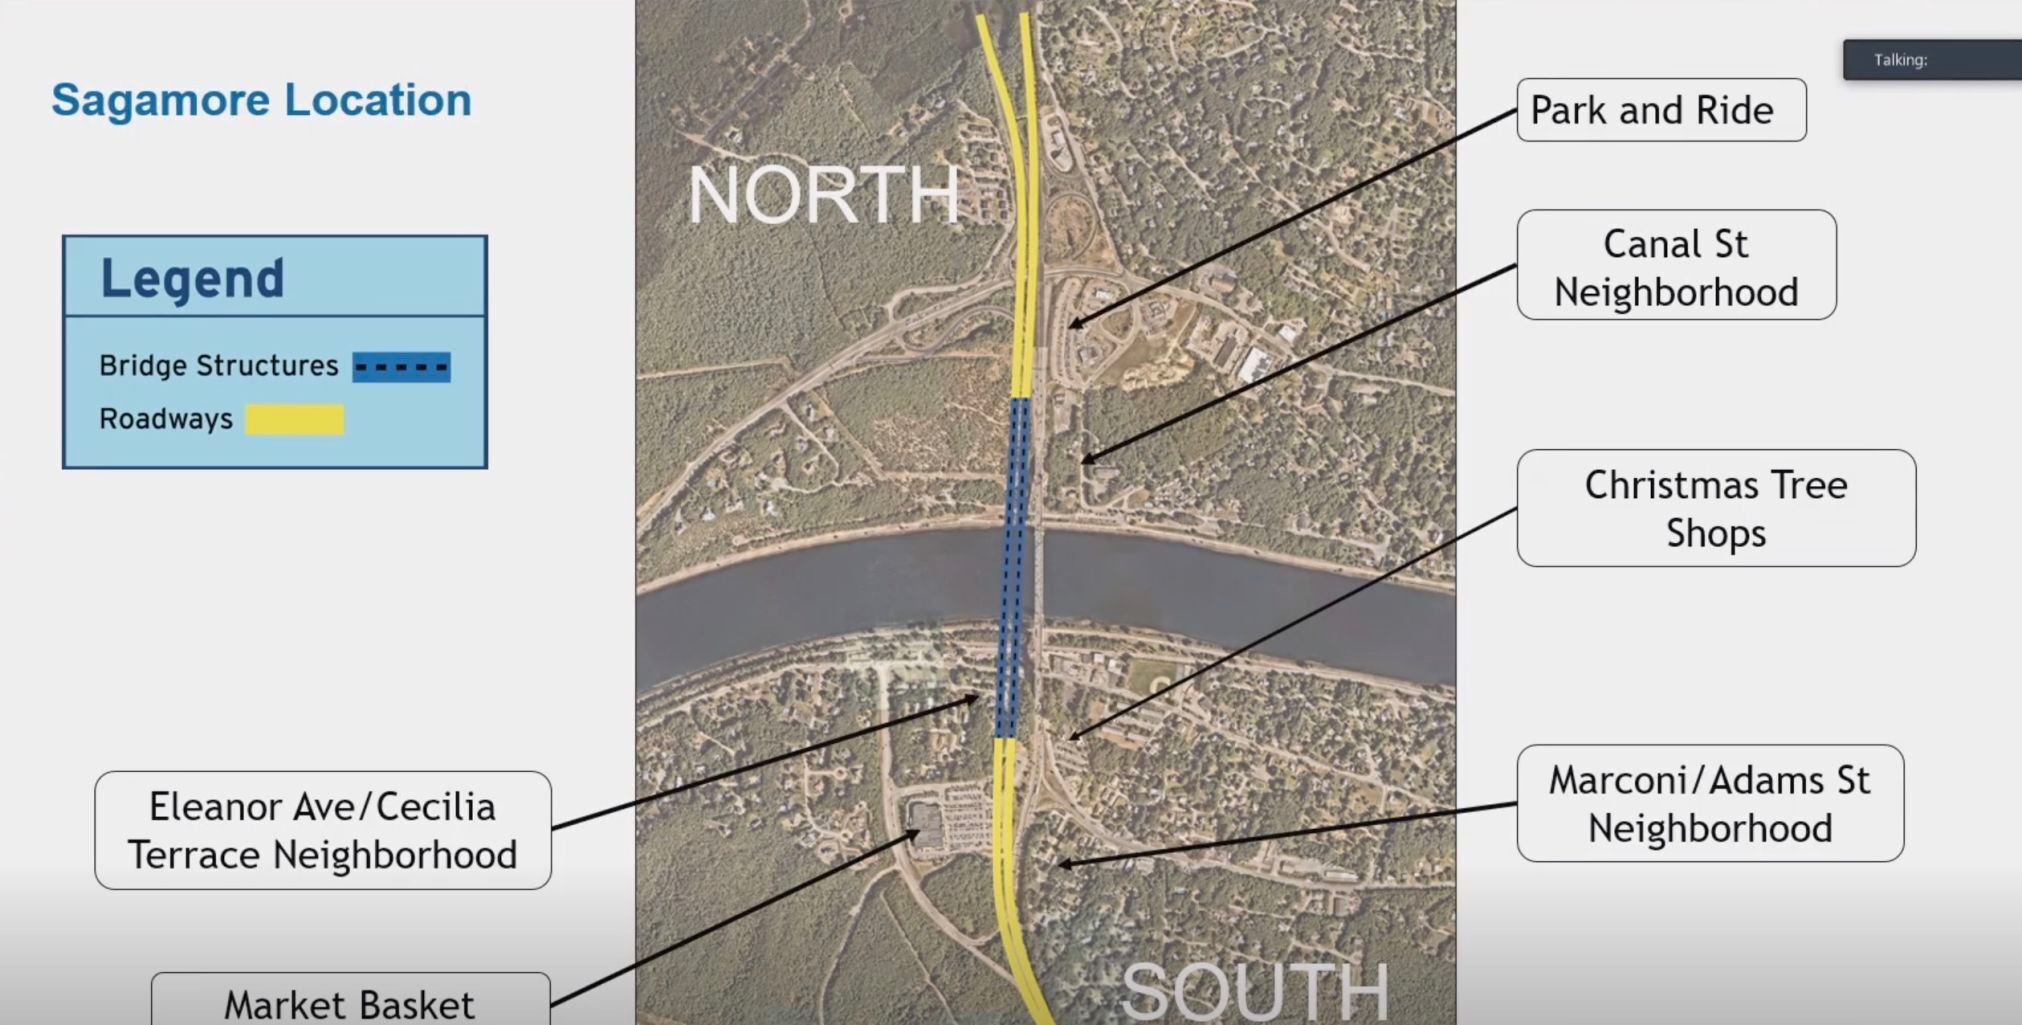 Roadway Options For New Sagamore Bridge Outlined | Bourne News